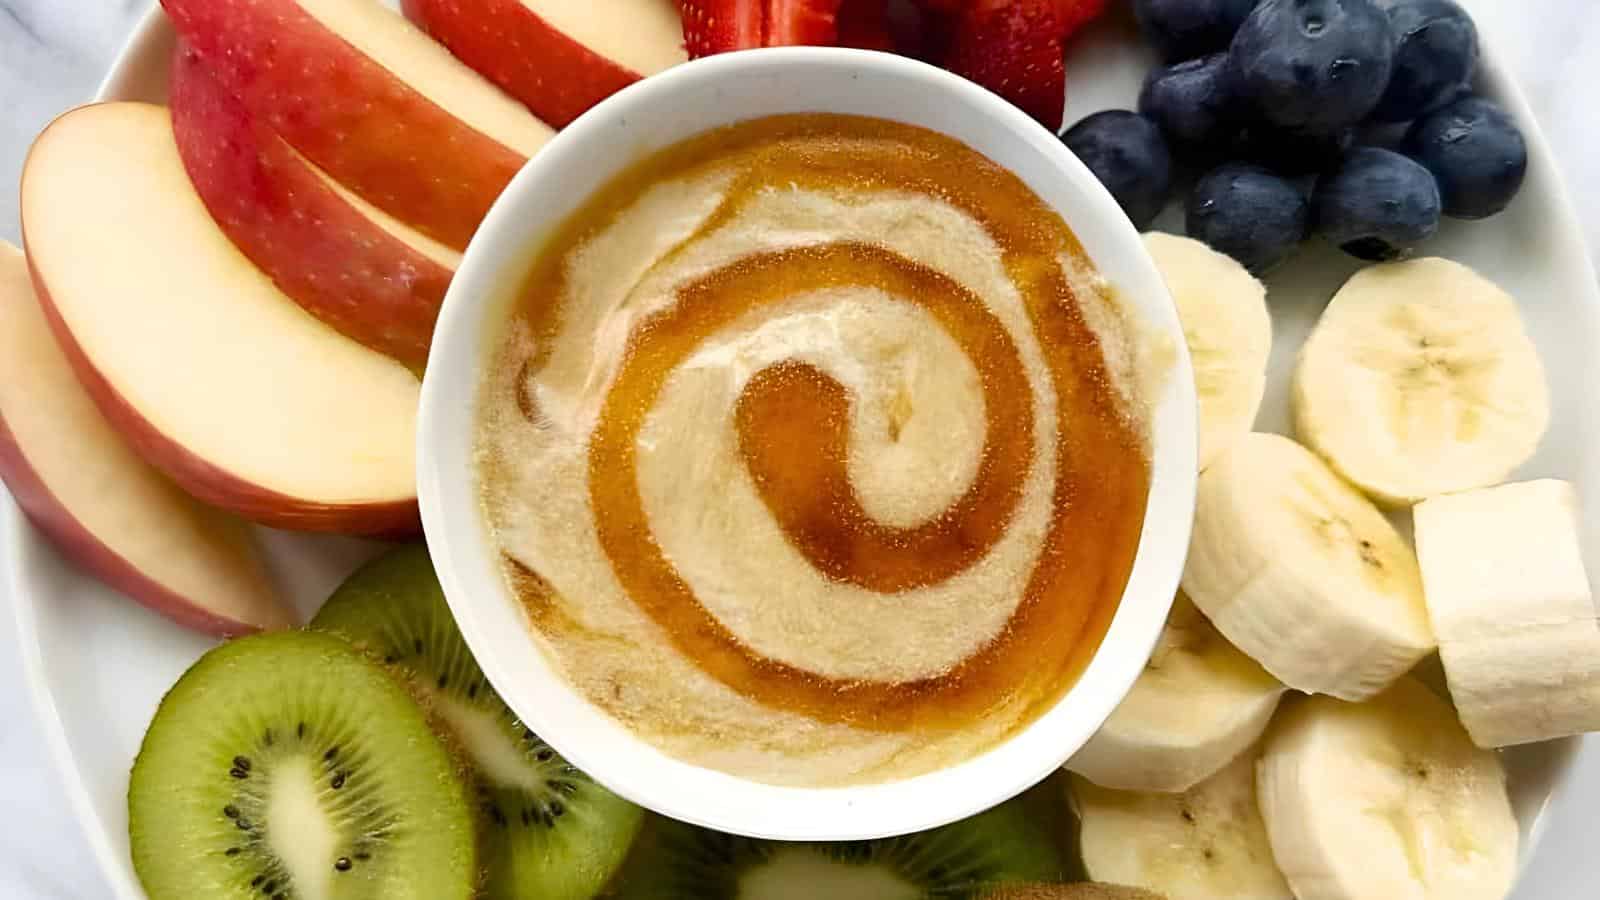 <p>This fruit dip is a light and refreshing snack for your pool party, perfect for pairing with a variety of fresh fruits. Easy to make, it requires just a few ingredients and can be prepared in minutes. The creamy texture and sweet taste make it a favorite among both kids and adults. It’s a great way to enjoy a healthier treat while relaxing by the pool. Serve it with an assortment of fruits for a colorful and tasty snack, making it perfect for a fun poolside gathering.<br><strong>Get the Recipe: </strong><a href="https://lesswithlaur.com/vegan-fruit-dip/?utm_source=msn&utm_medium=page&utm_campaign=msn" rel="noopener">Vegan Fruit Dip</a></p>